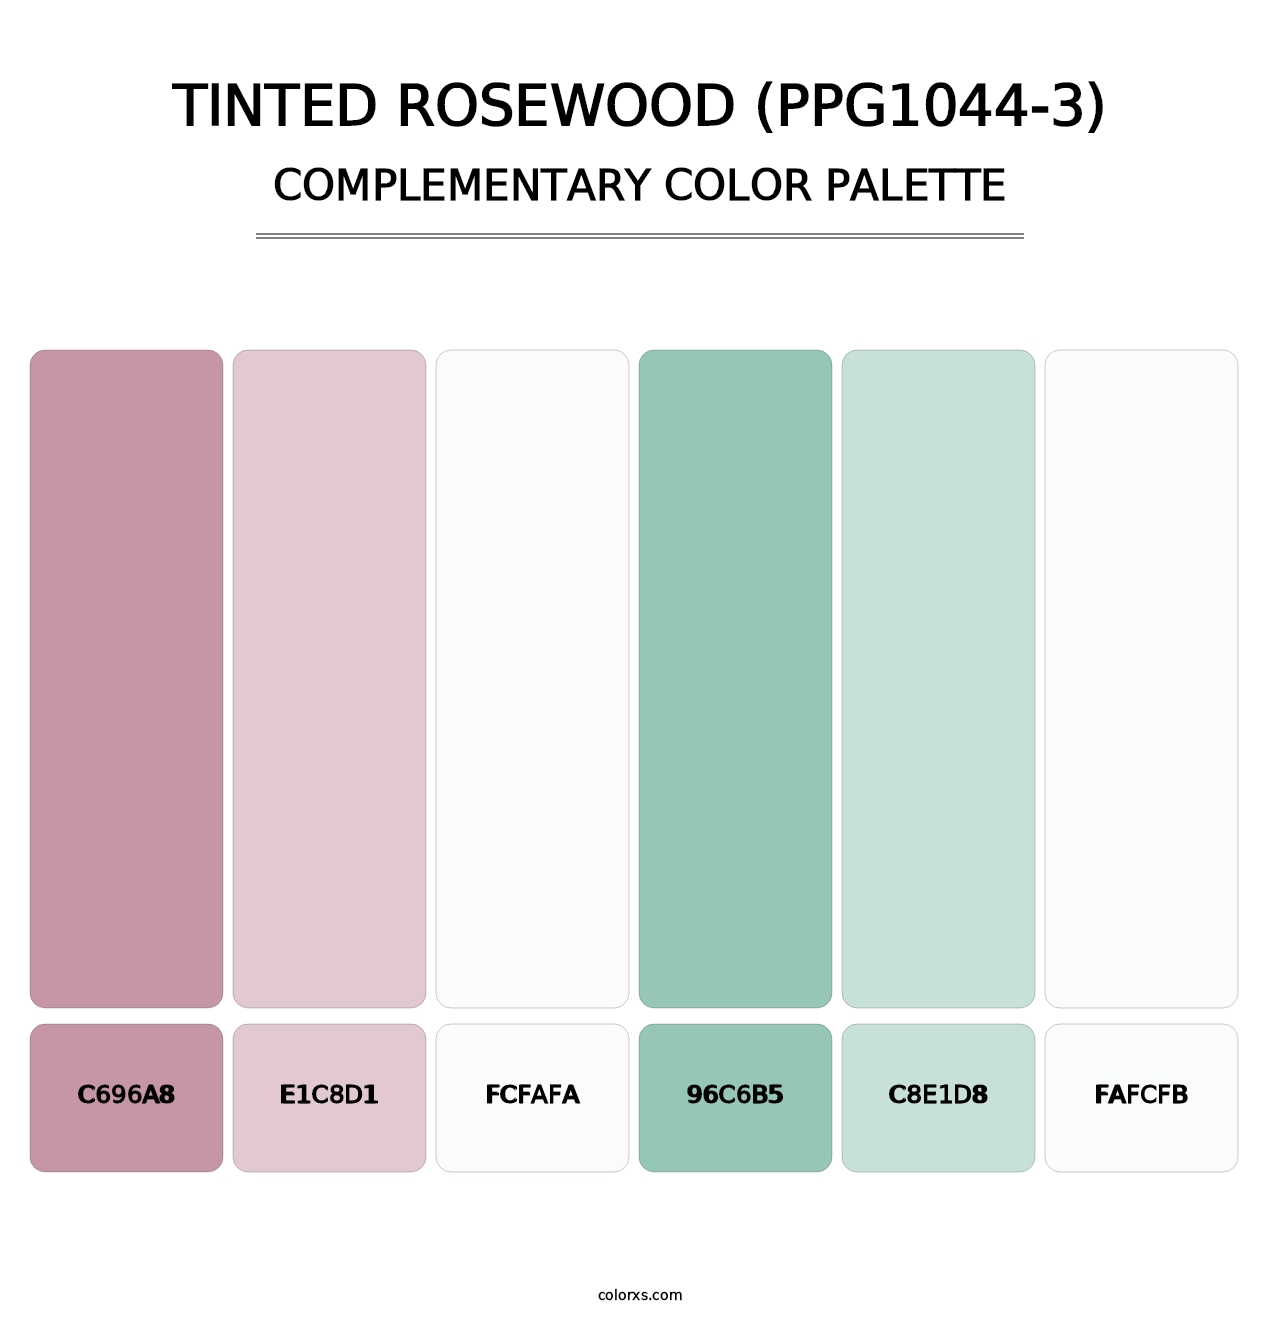 Tinted Rosewood (PPG1044-3) - Complementary Color Palette